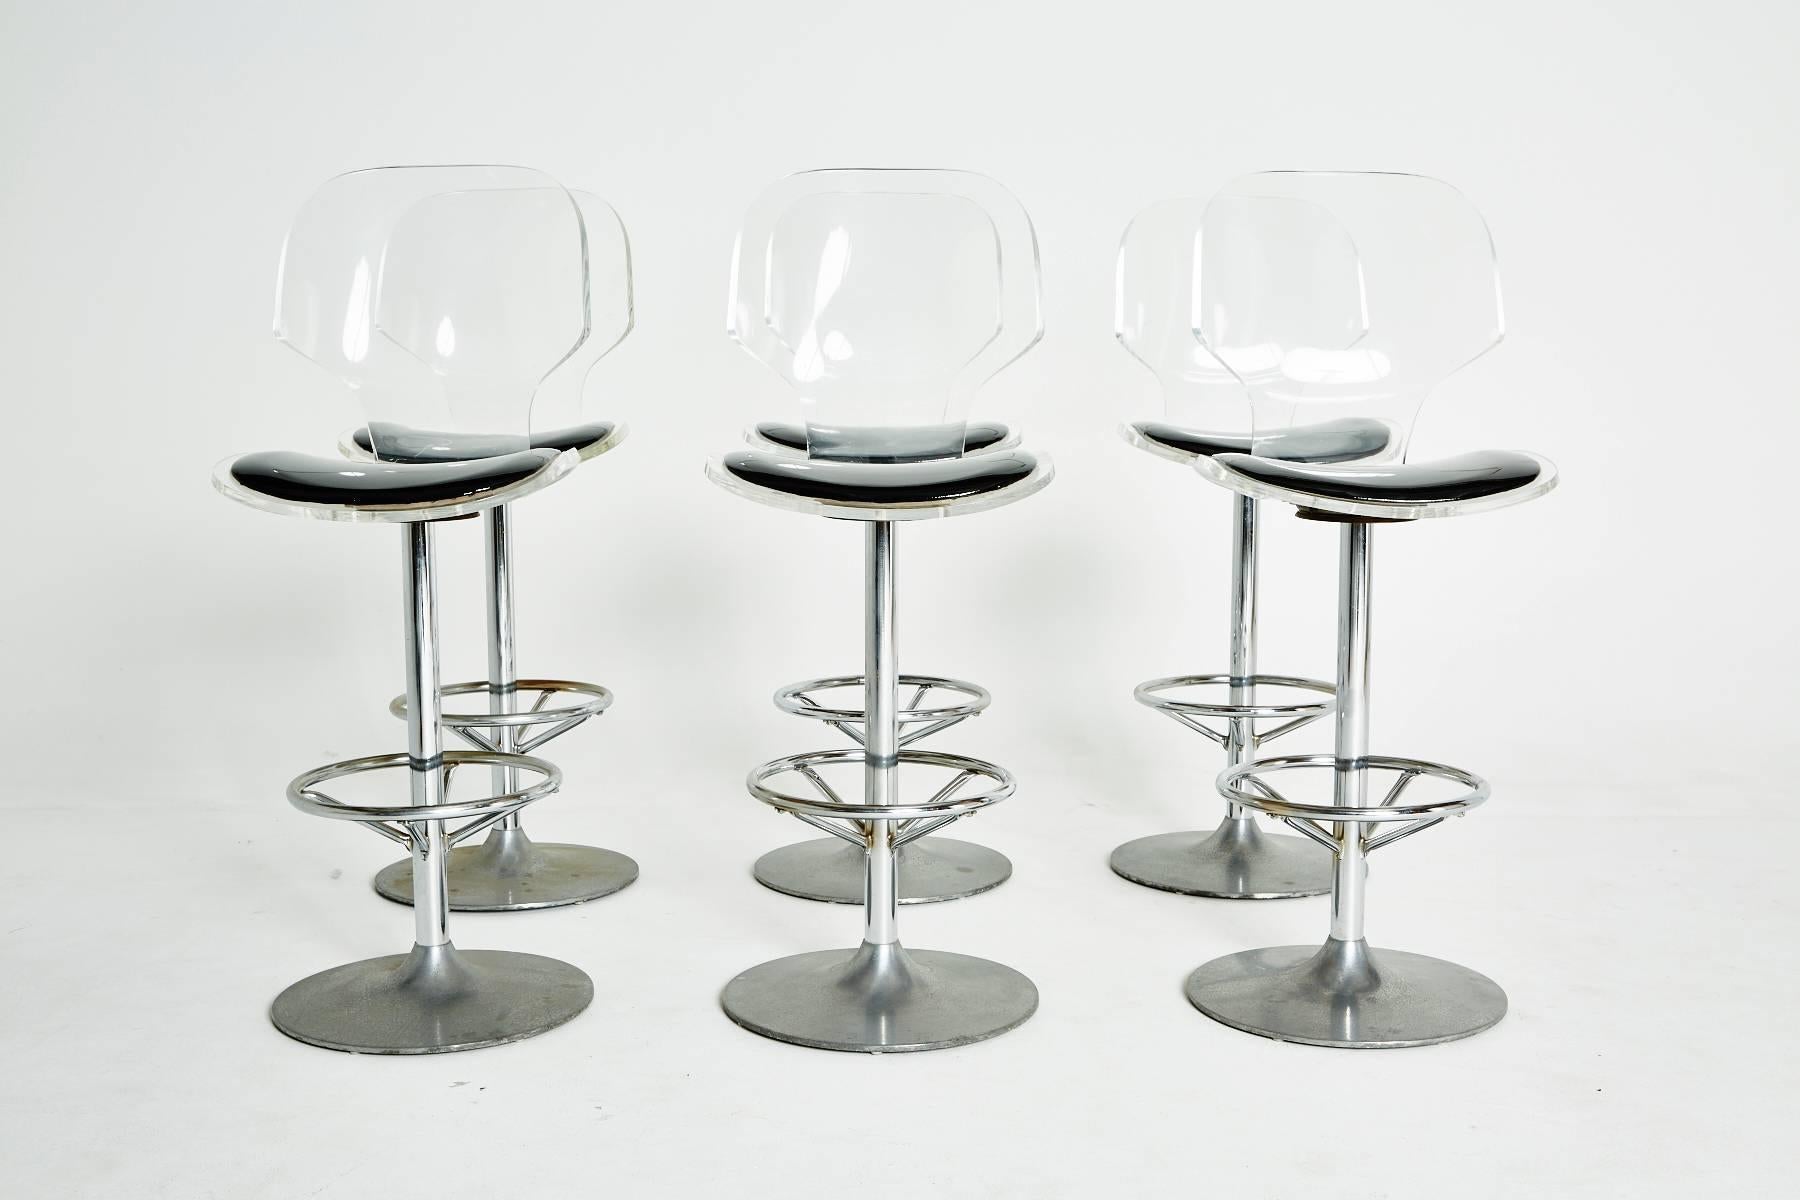 This set of six (6) classic mid-century lucite bar stools by Hill Manufacturing with curved Lucite clamshell backrests and seats adorned by black glossed cushions. The swiveling seats are mounted on chrome bases with circular footrests. 

Lucite